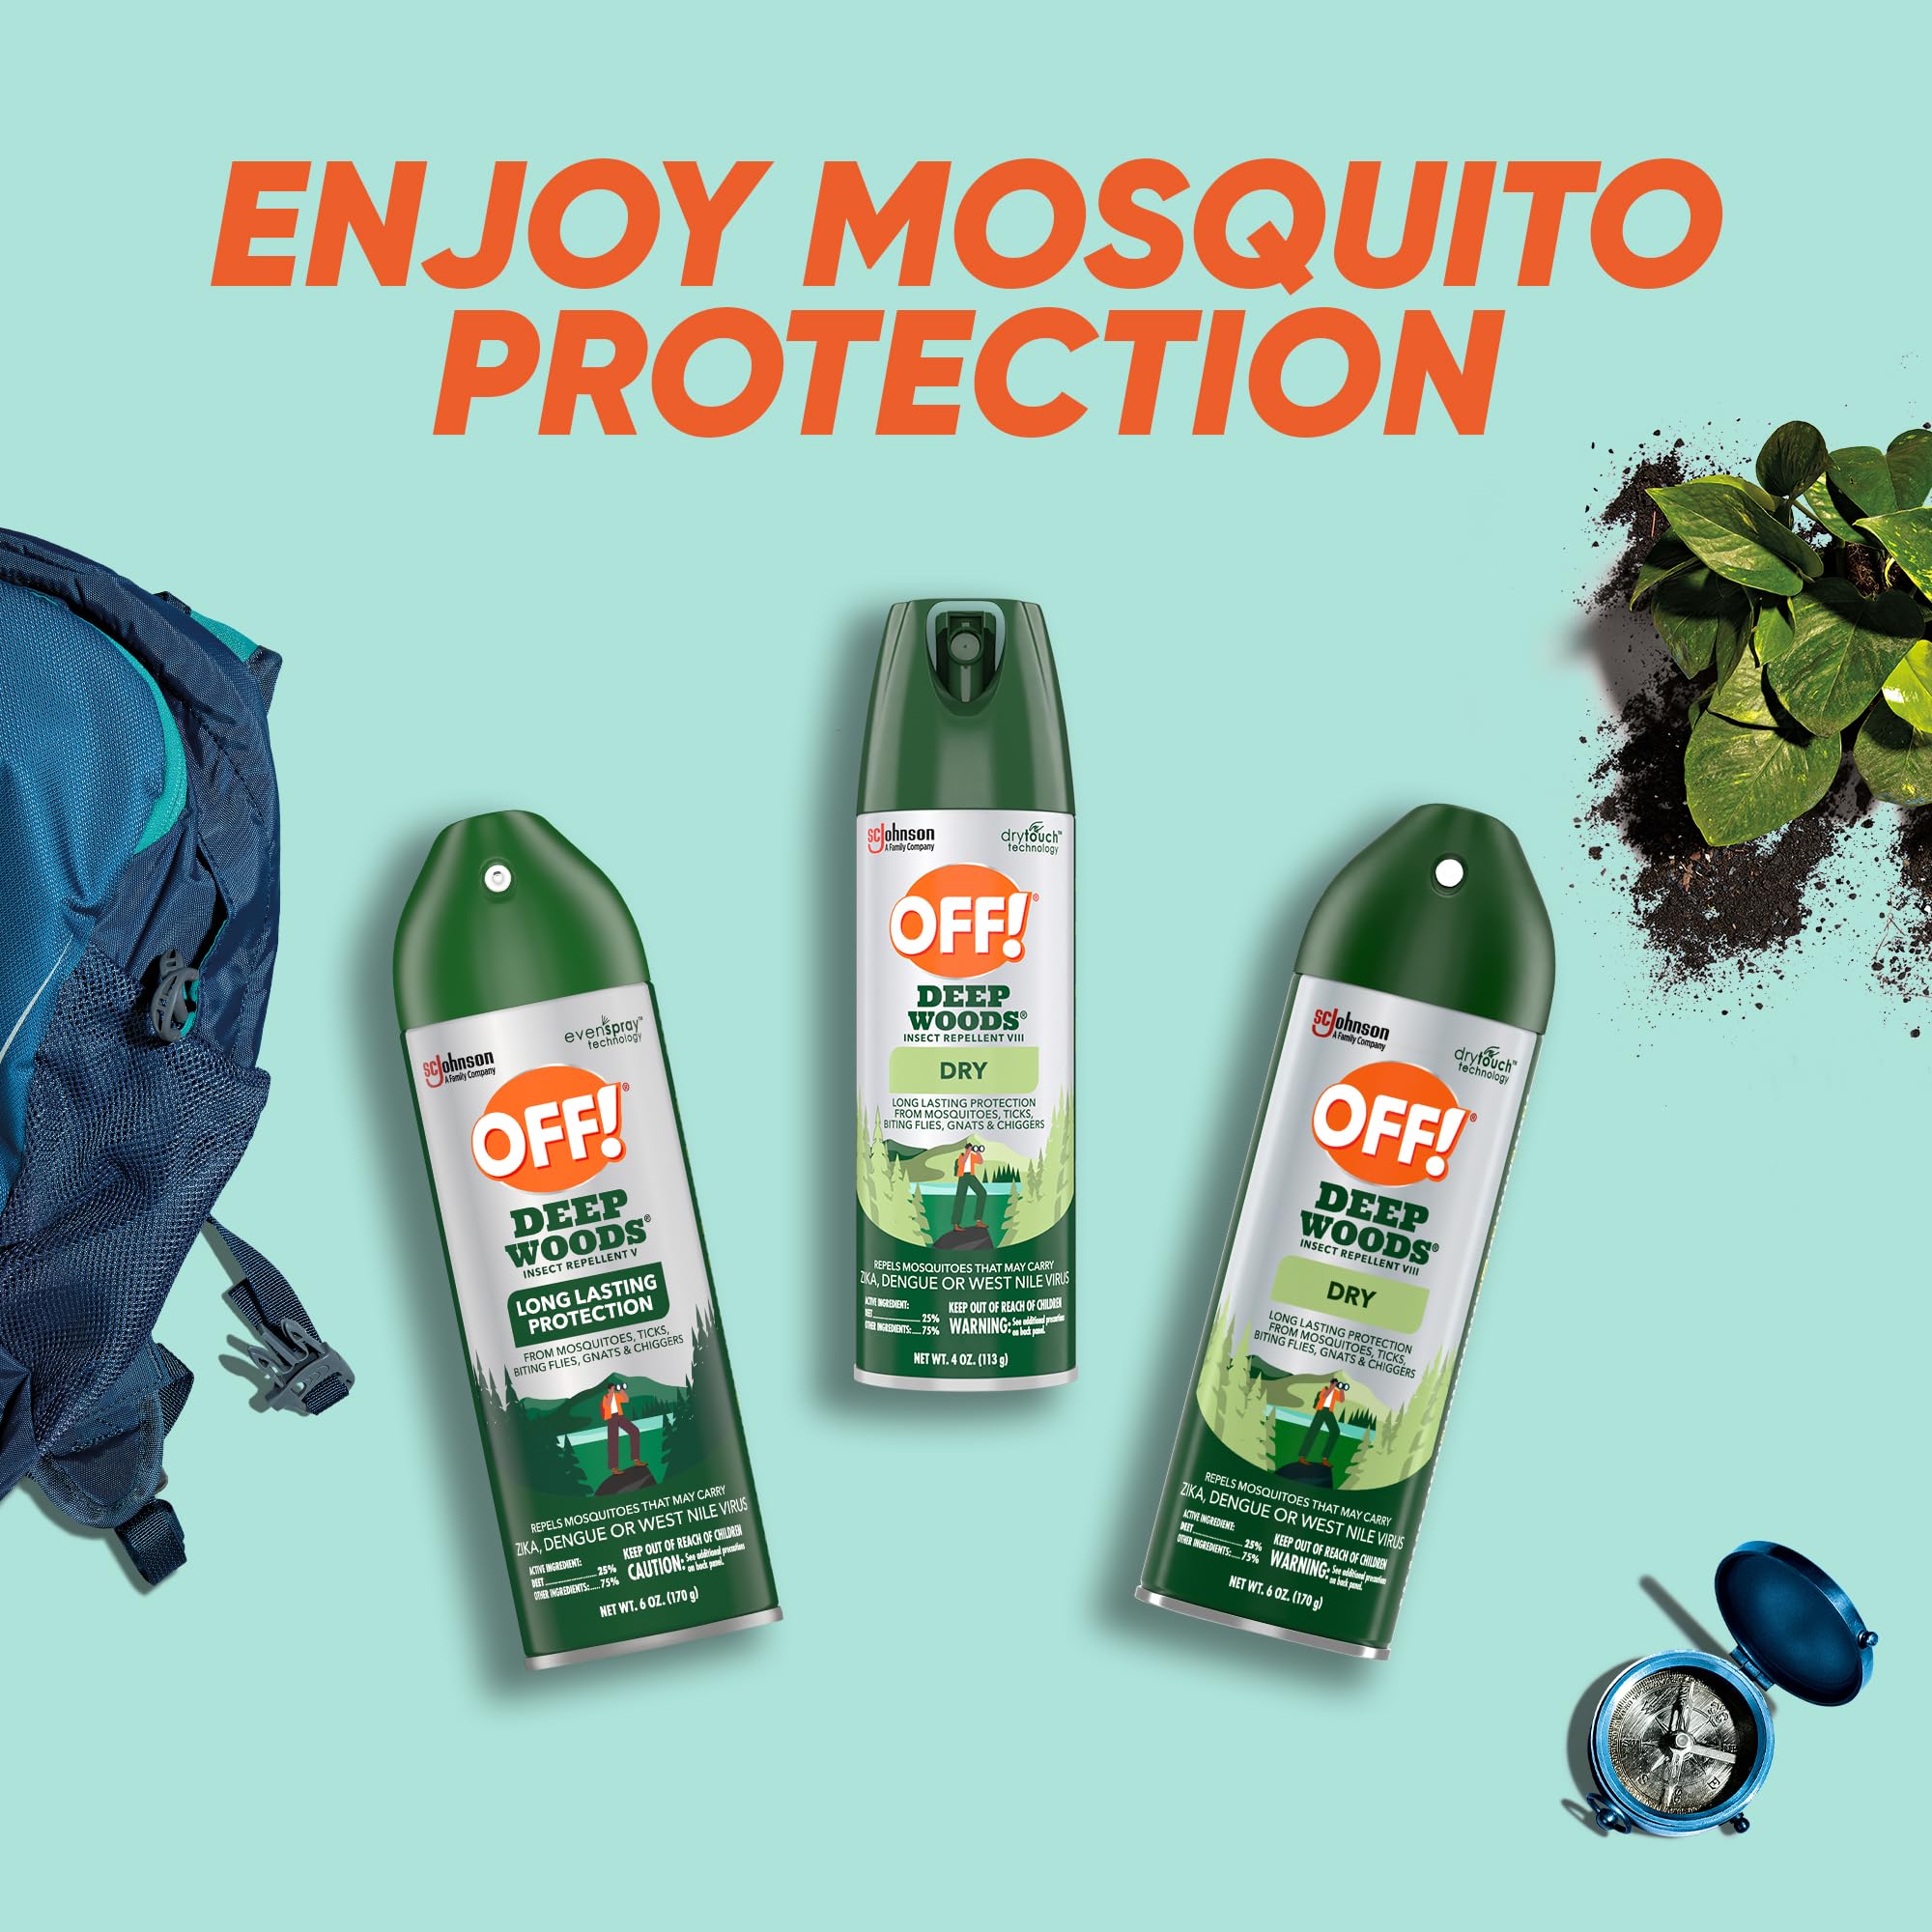 OFF! Deep Woods Insect Repellent Aerosol, Dry, Non-Greasy Bug Spray with Long Lasting Protection from Mosquitoes, 4 oz, 2 ct